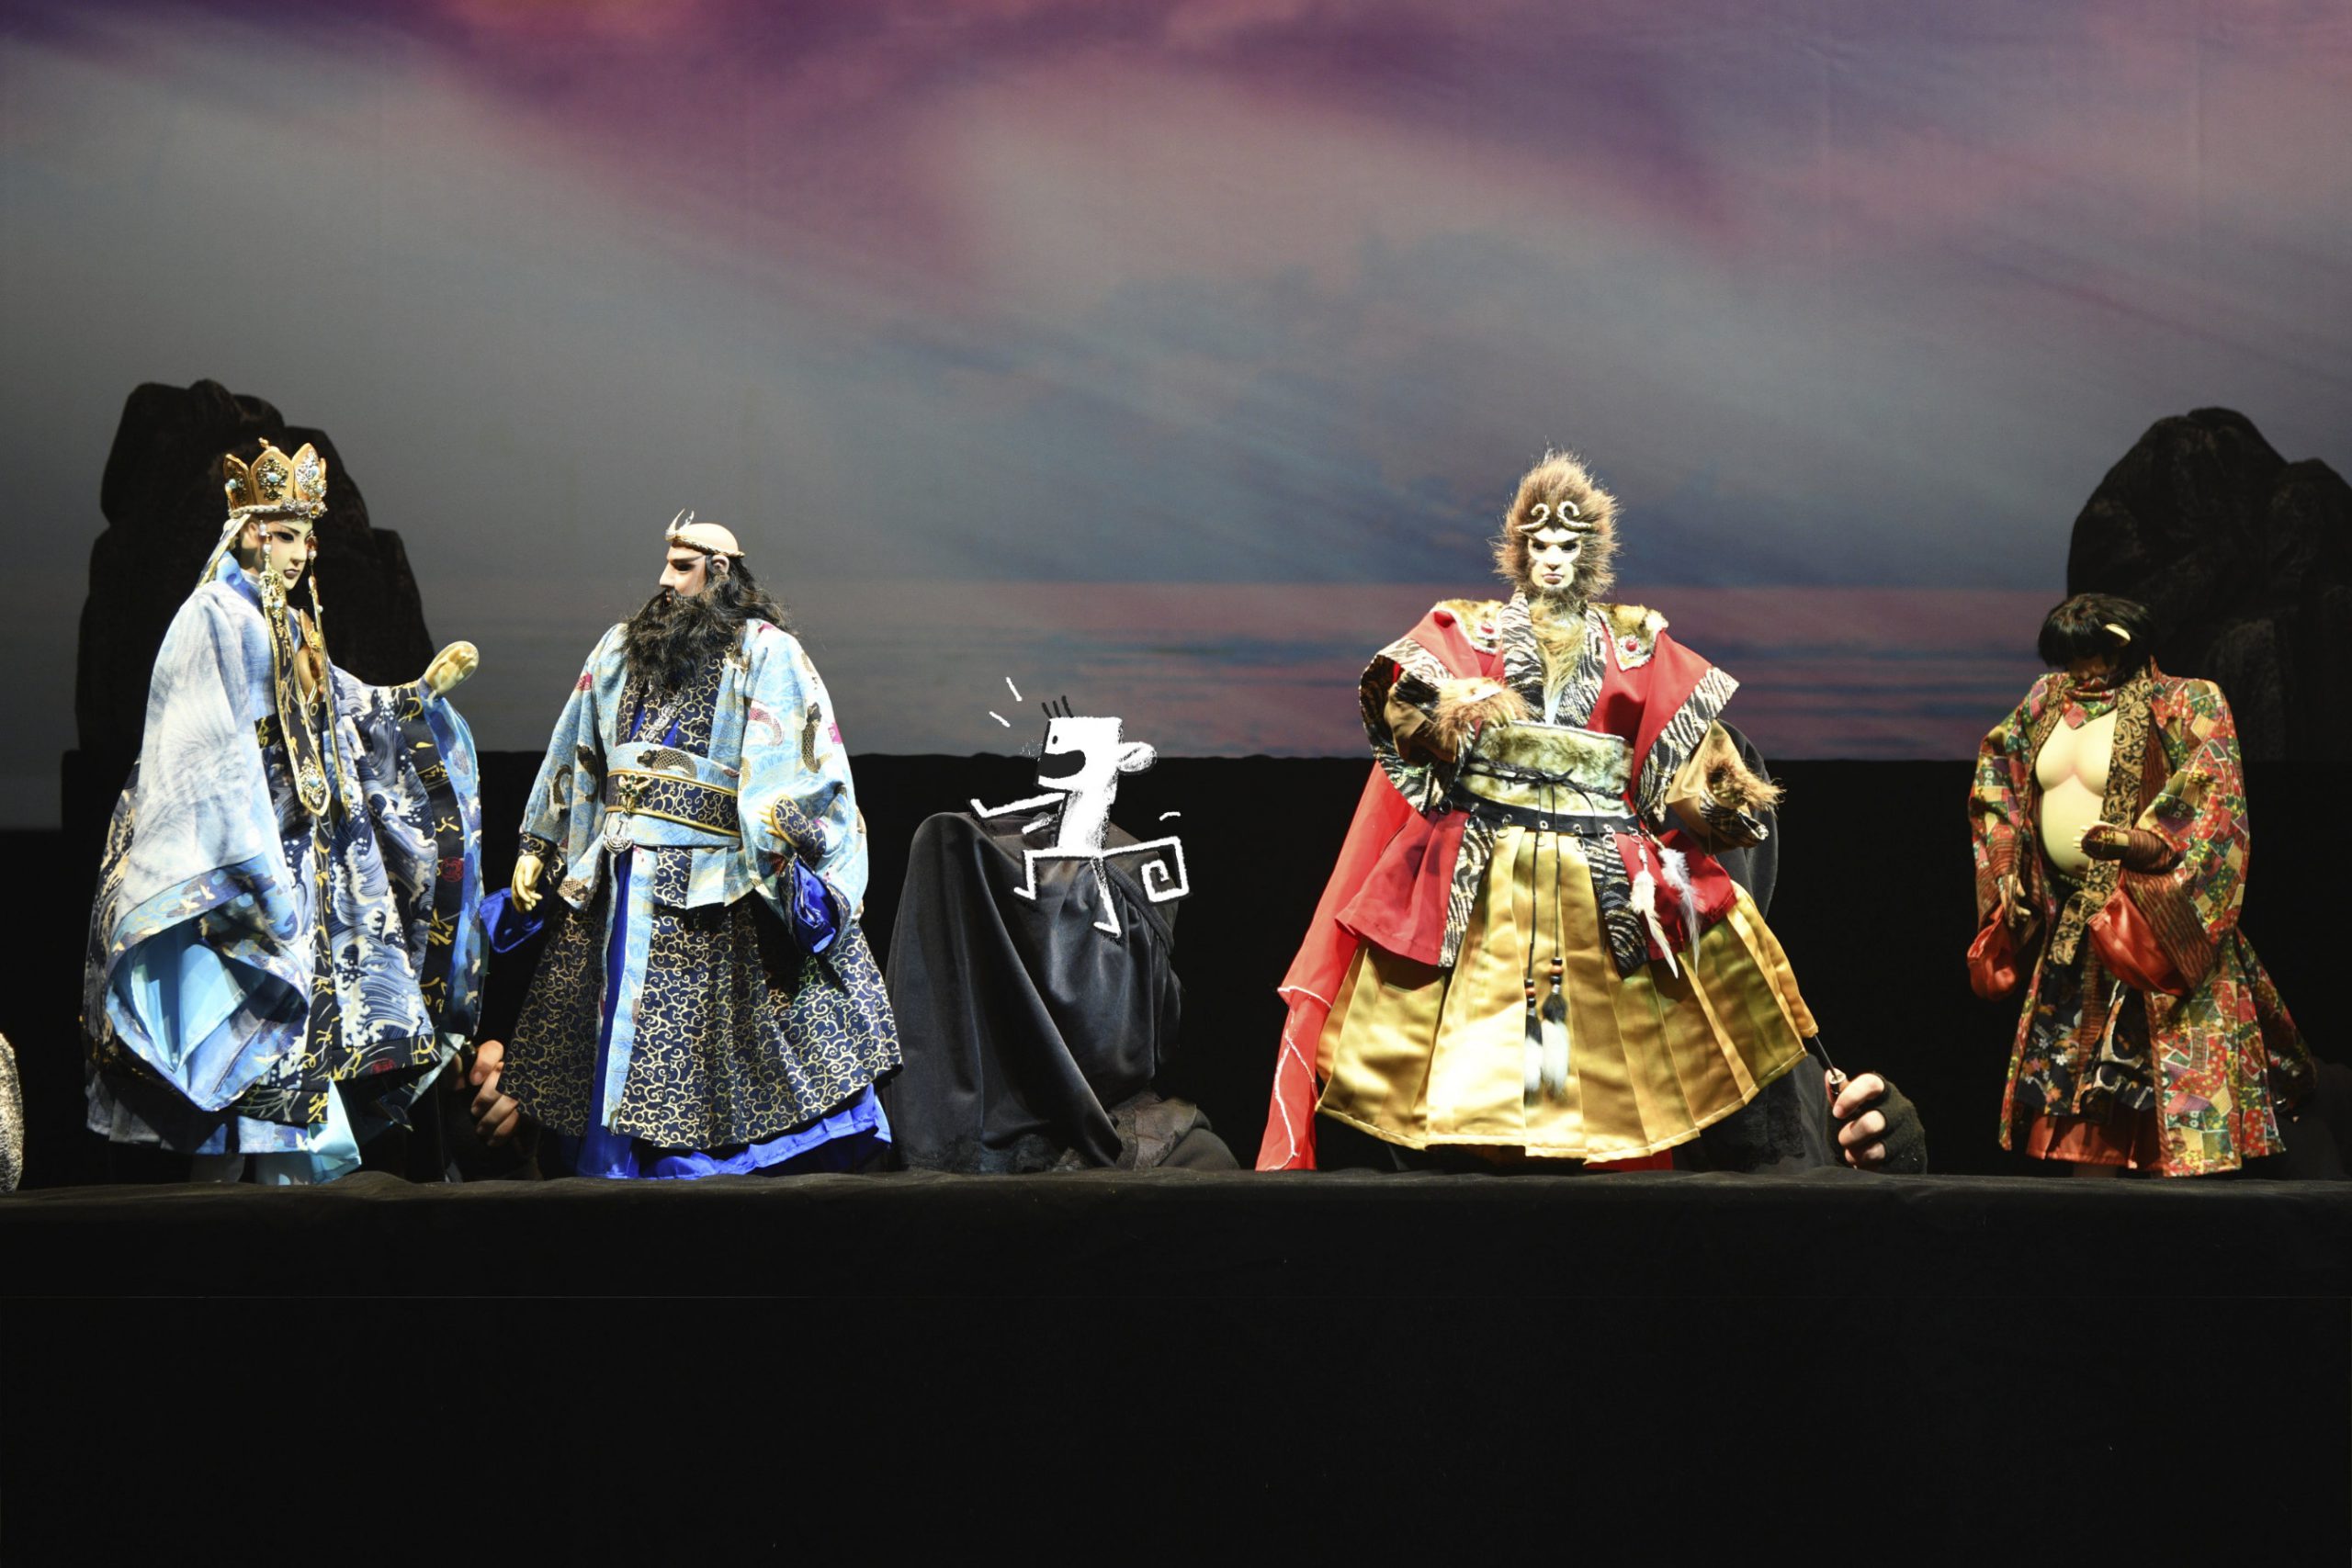 Traditional hand puppets with Monkey King, Tang San Zang and his disciples